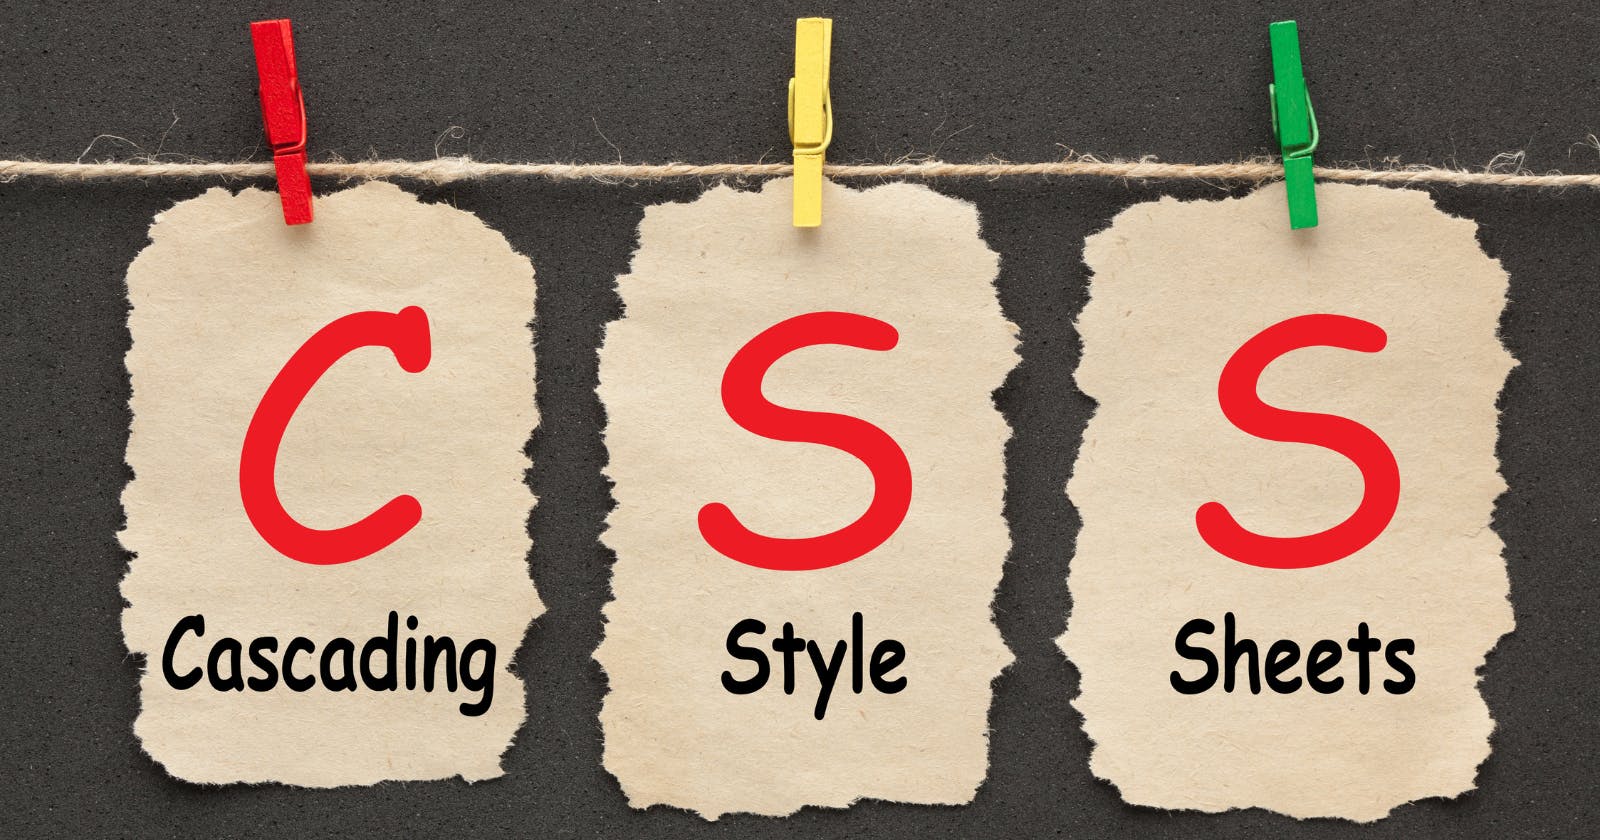 10 Underutilized CSS Properties Every Developer Should Know